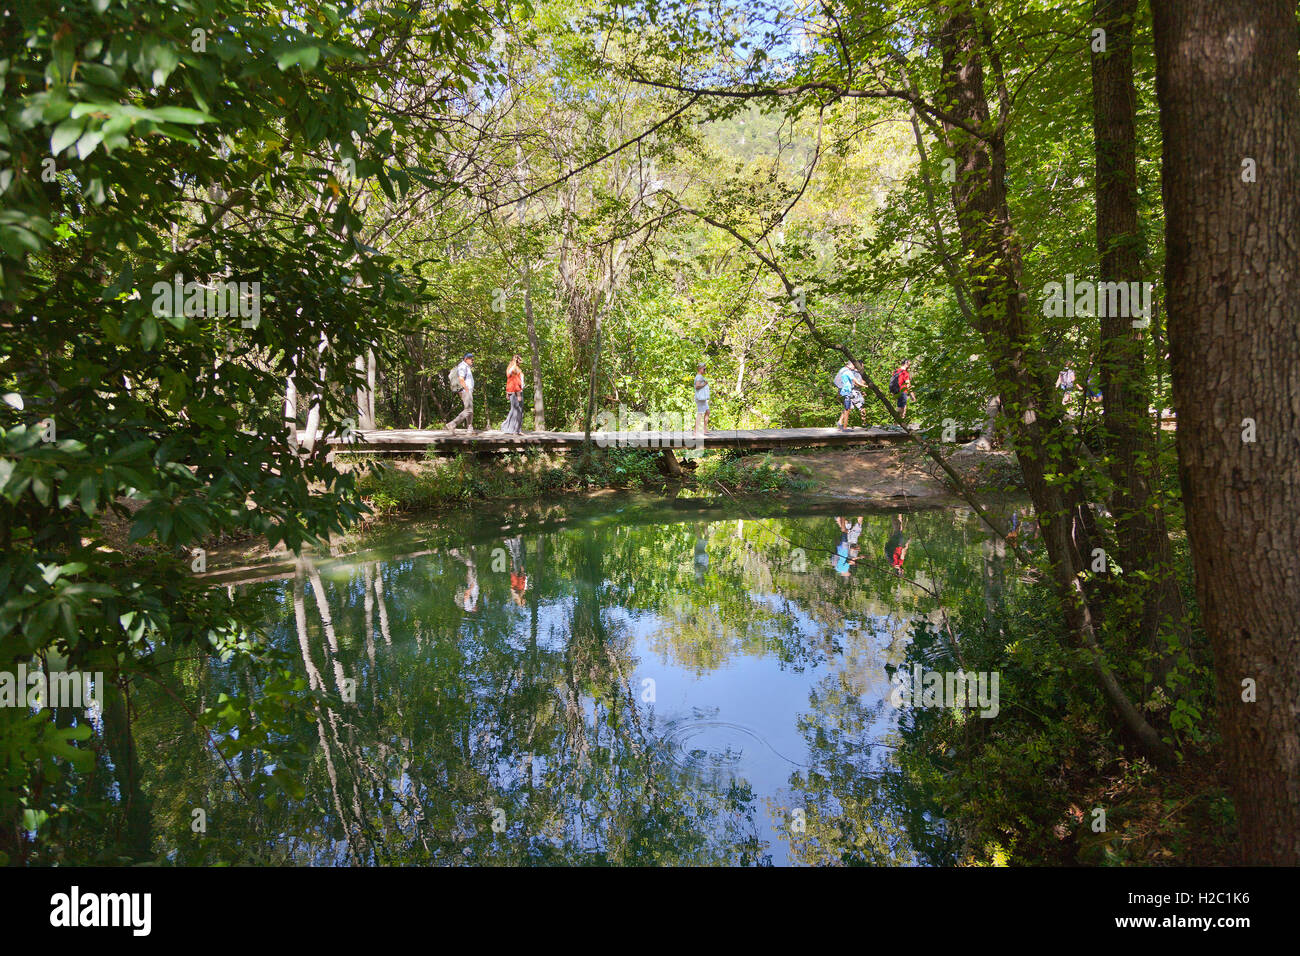 Krka National Park, Croatia, wooden path walkway with tourists, water reflections Stock Photo